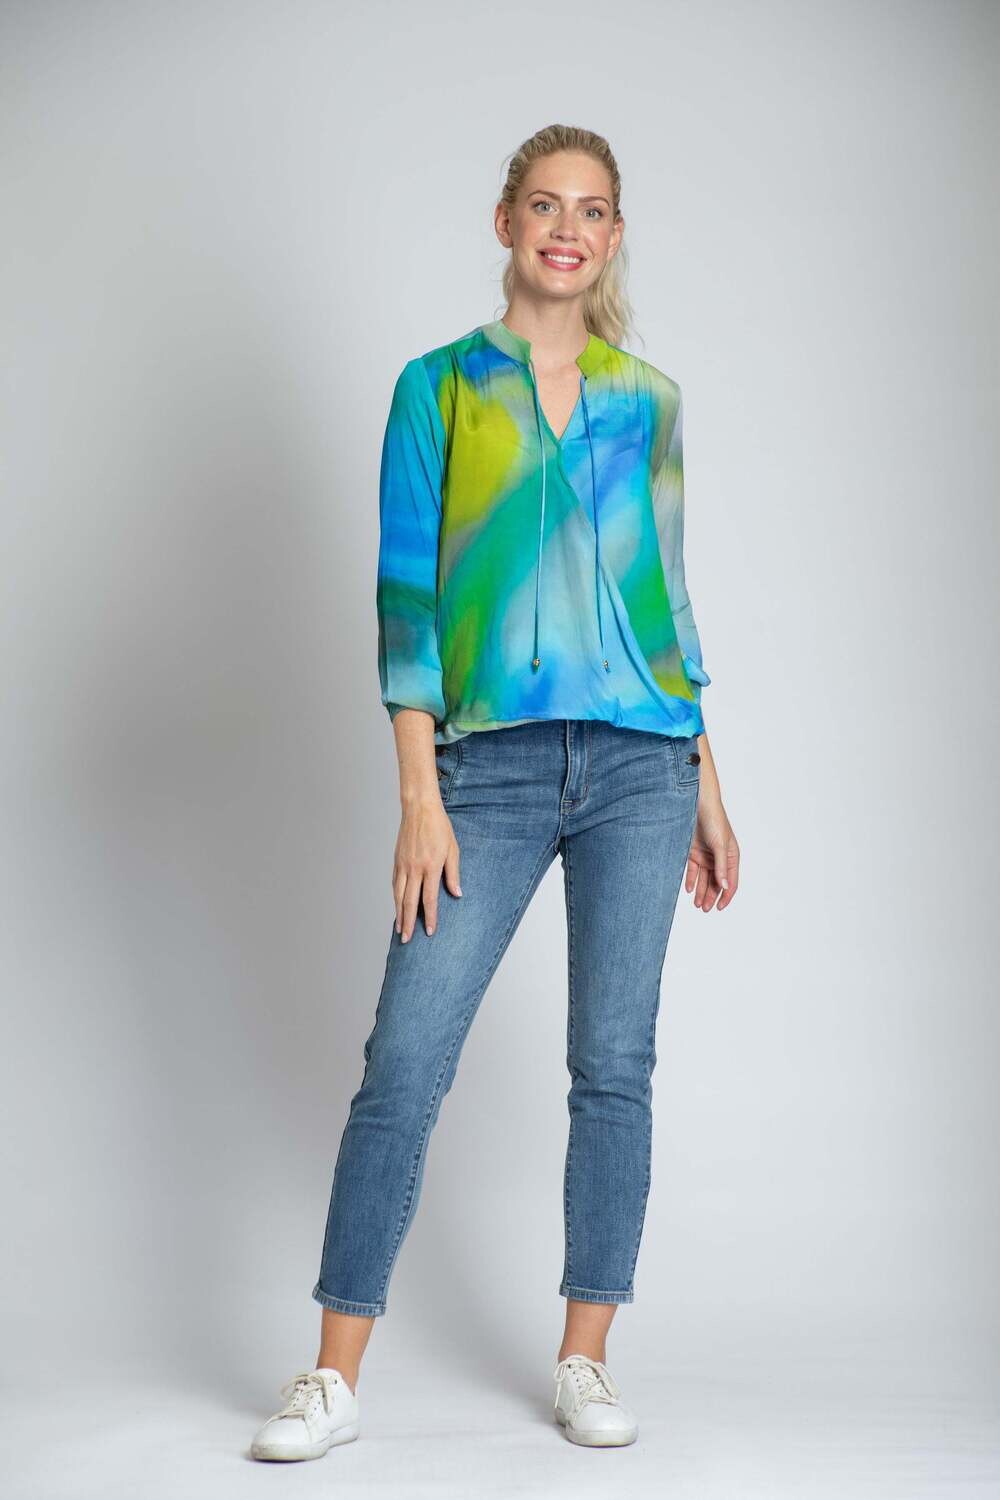 APNY Blue/Lime Ombre Print - Crossover Top With Tassel